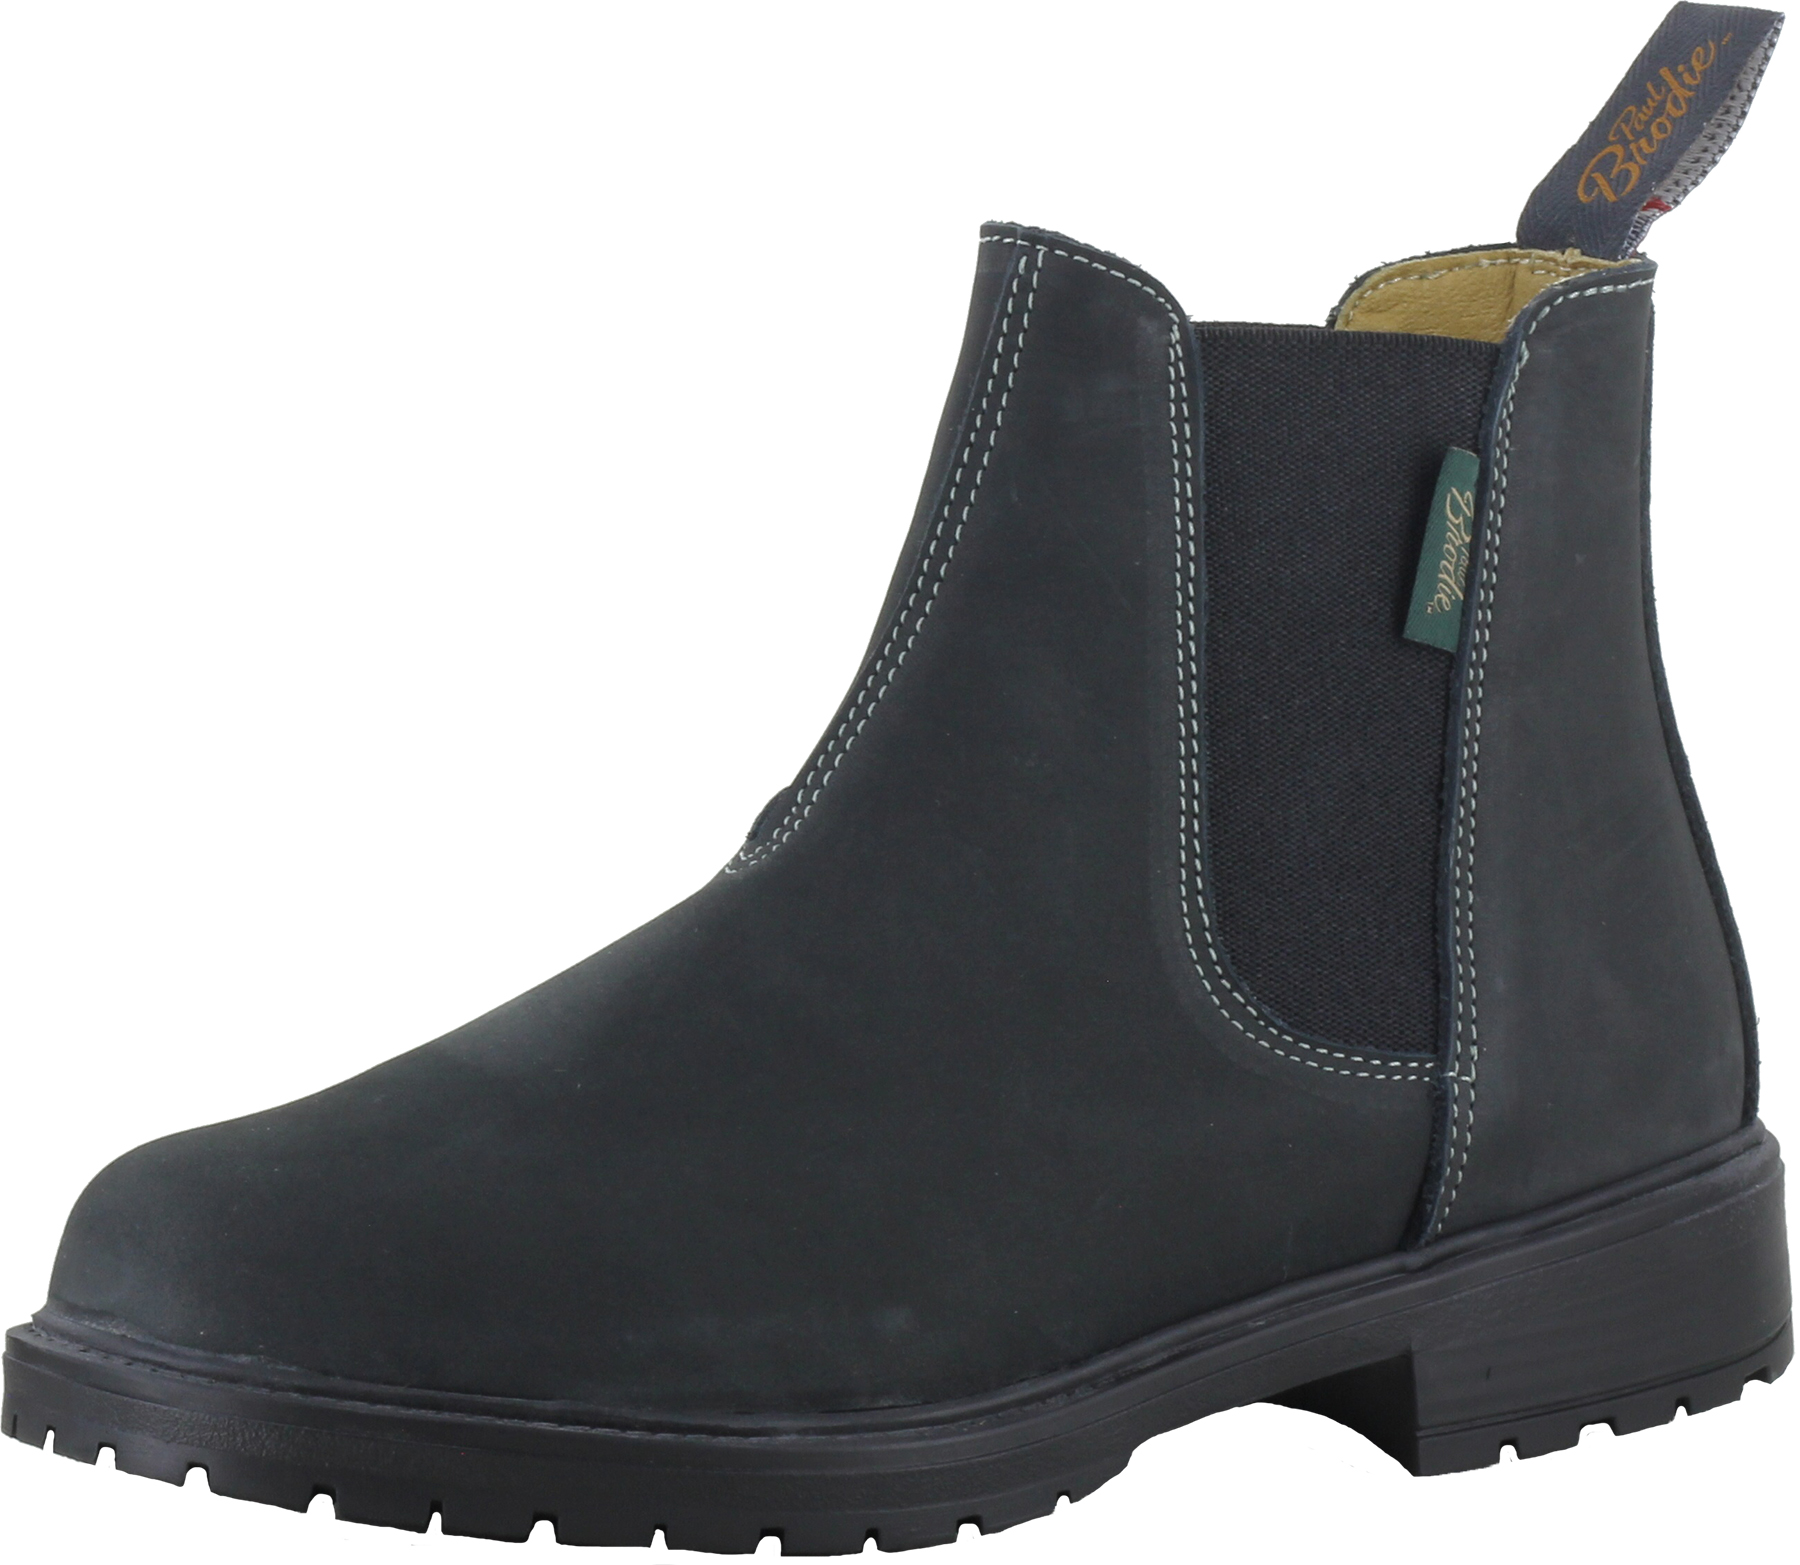 Ladies Paul Brodie Double Gore Boots - Charcoal Grey